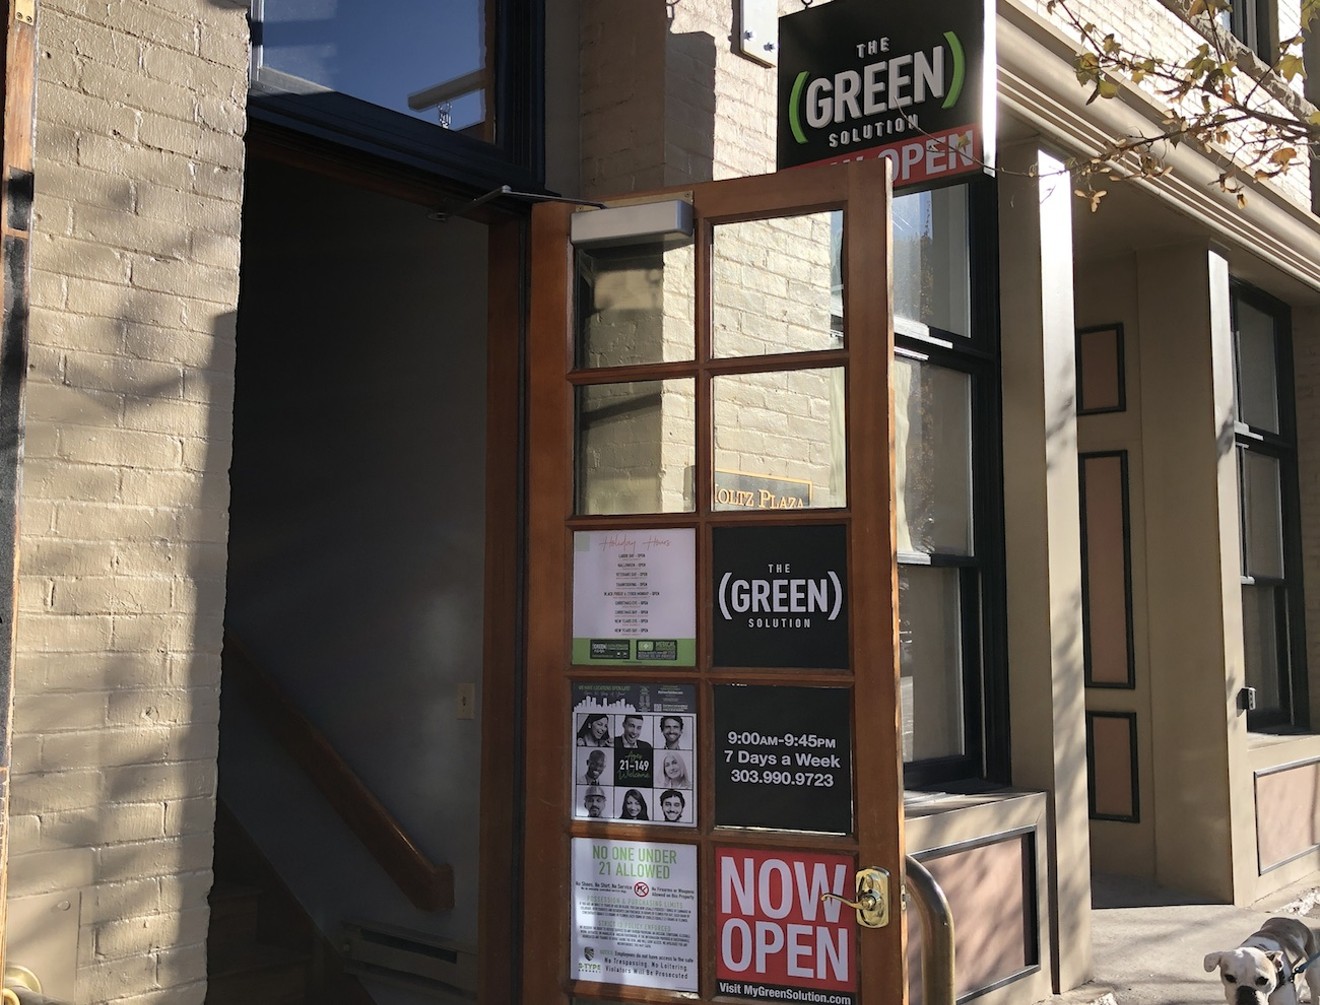 The Green Solution is now open in Aspen.